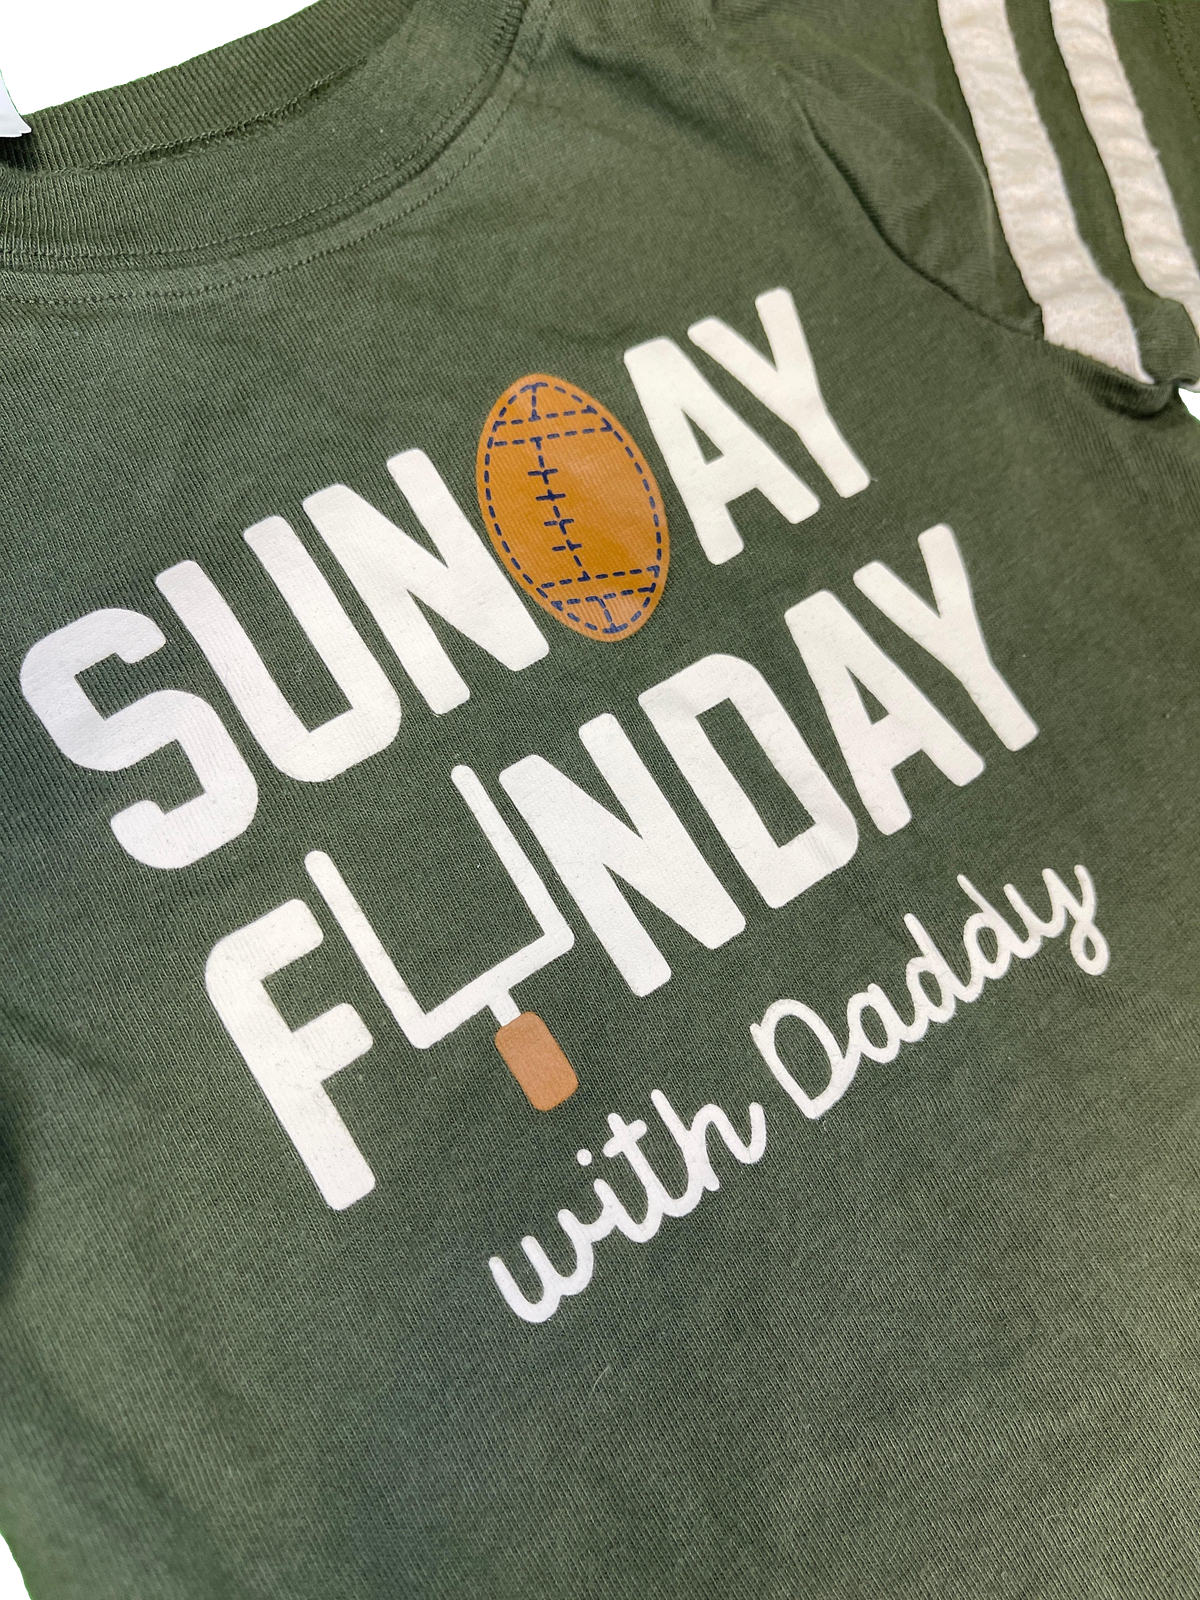 American Football "Sunday Funday with Daddy" Bodysuit/Vest 12 Months